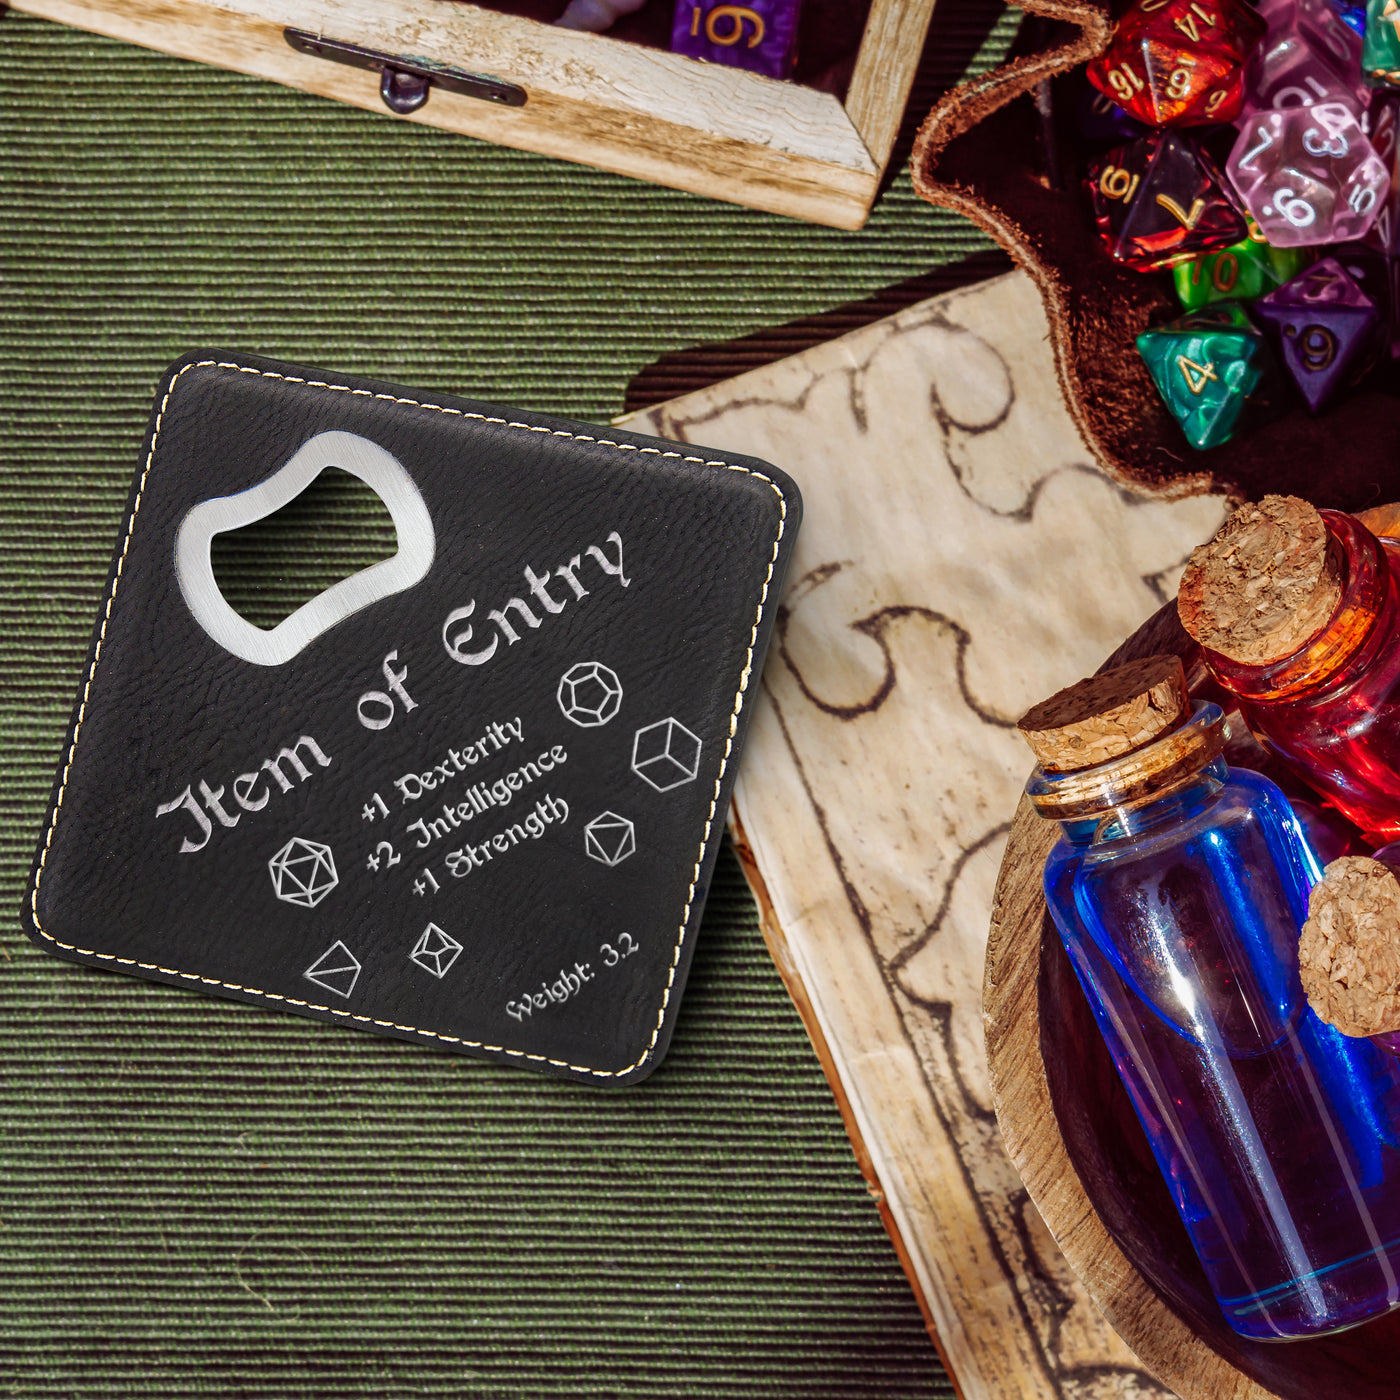 Dungeons and Dragons Item of Entry DnD Coaster Bottle Opener | DnD Gift for Men | Dungeon Master Gift | DnD Stuff | D&D Gifts